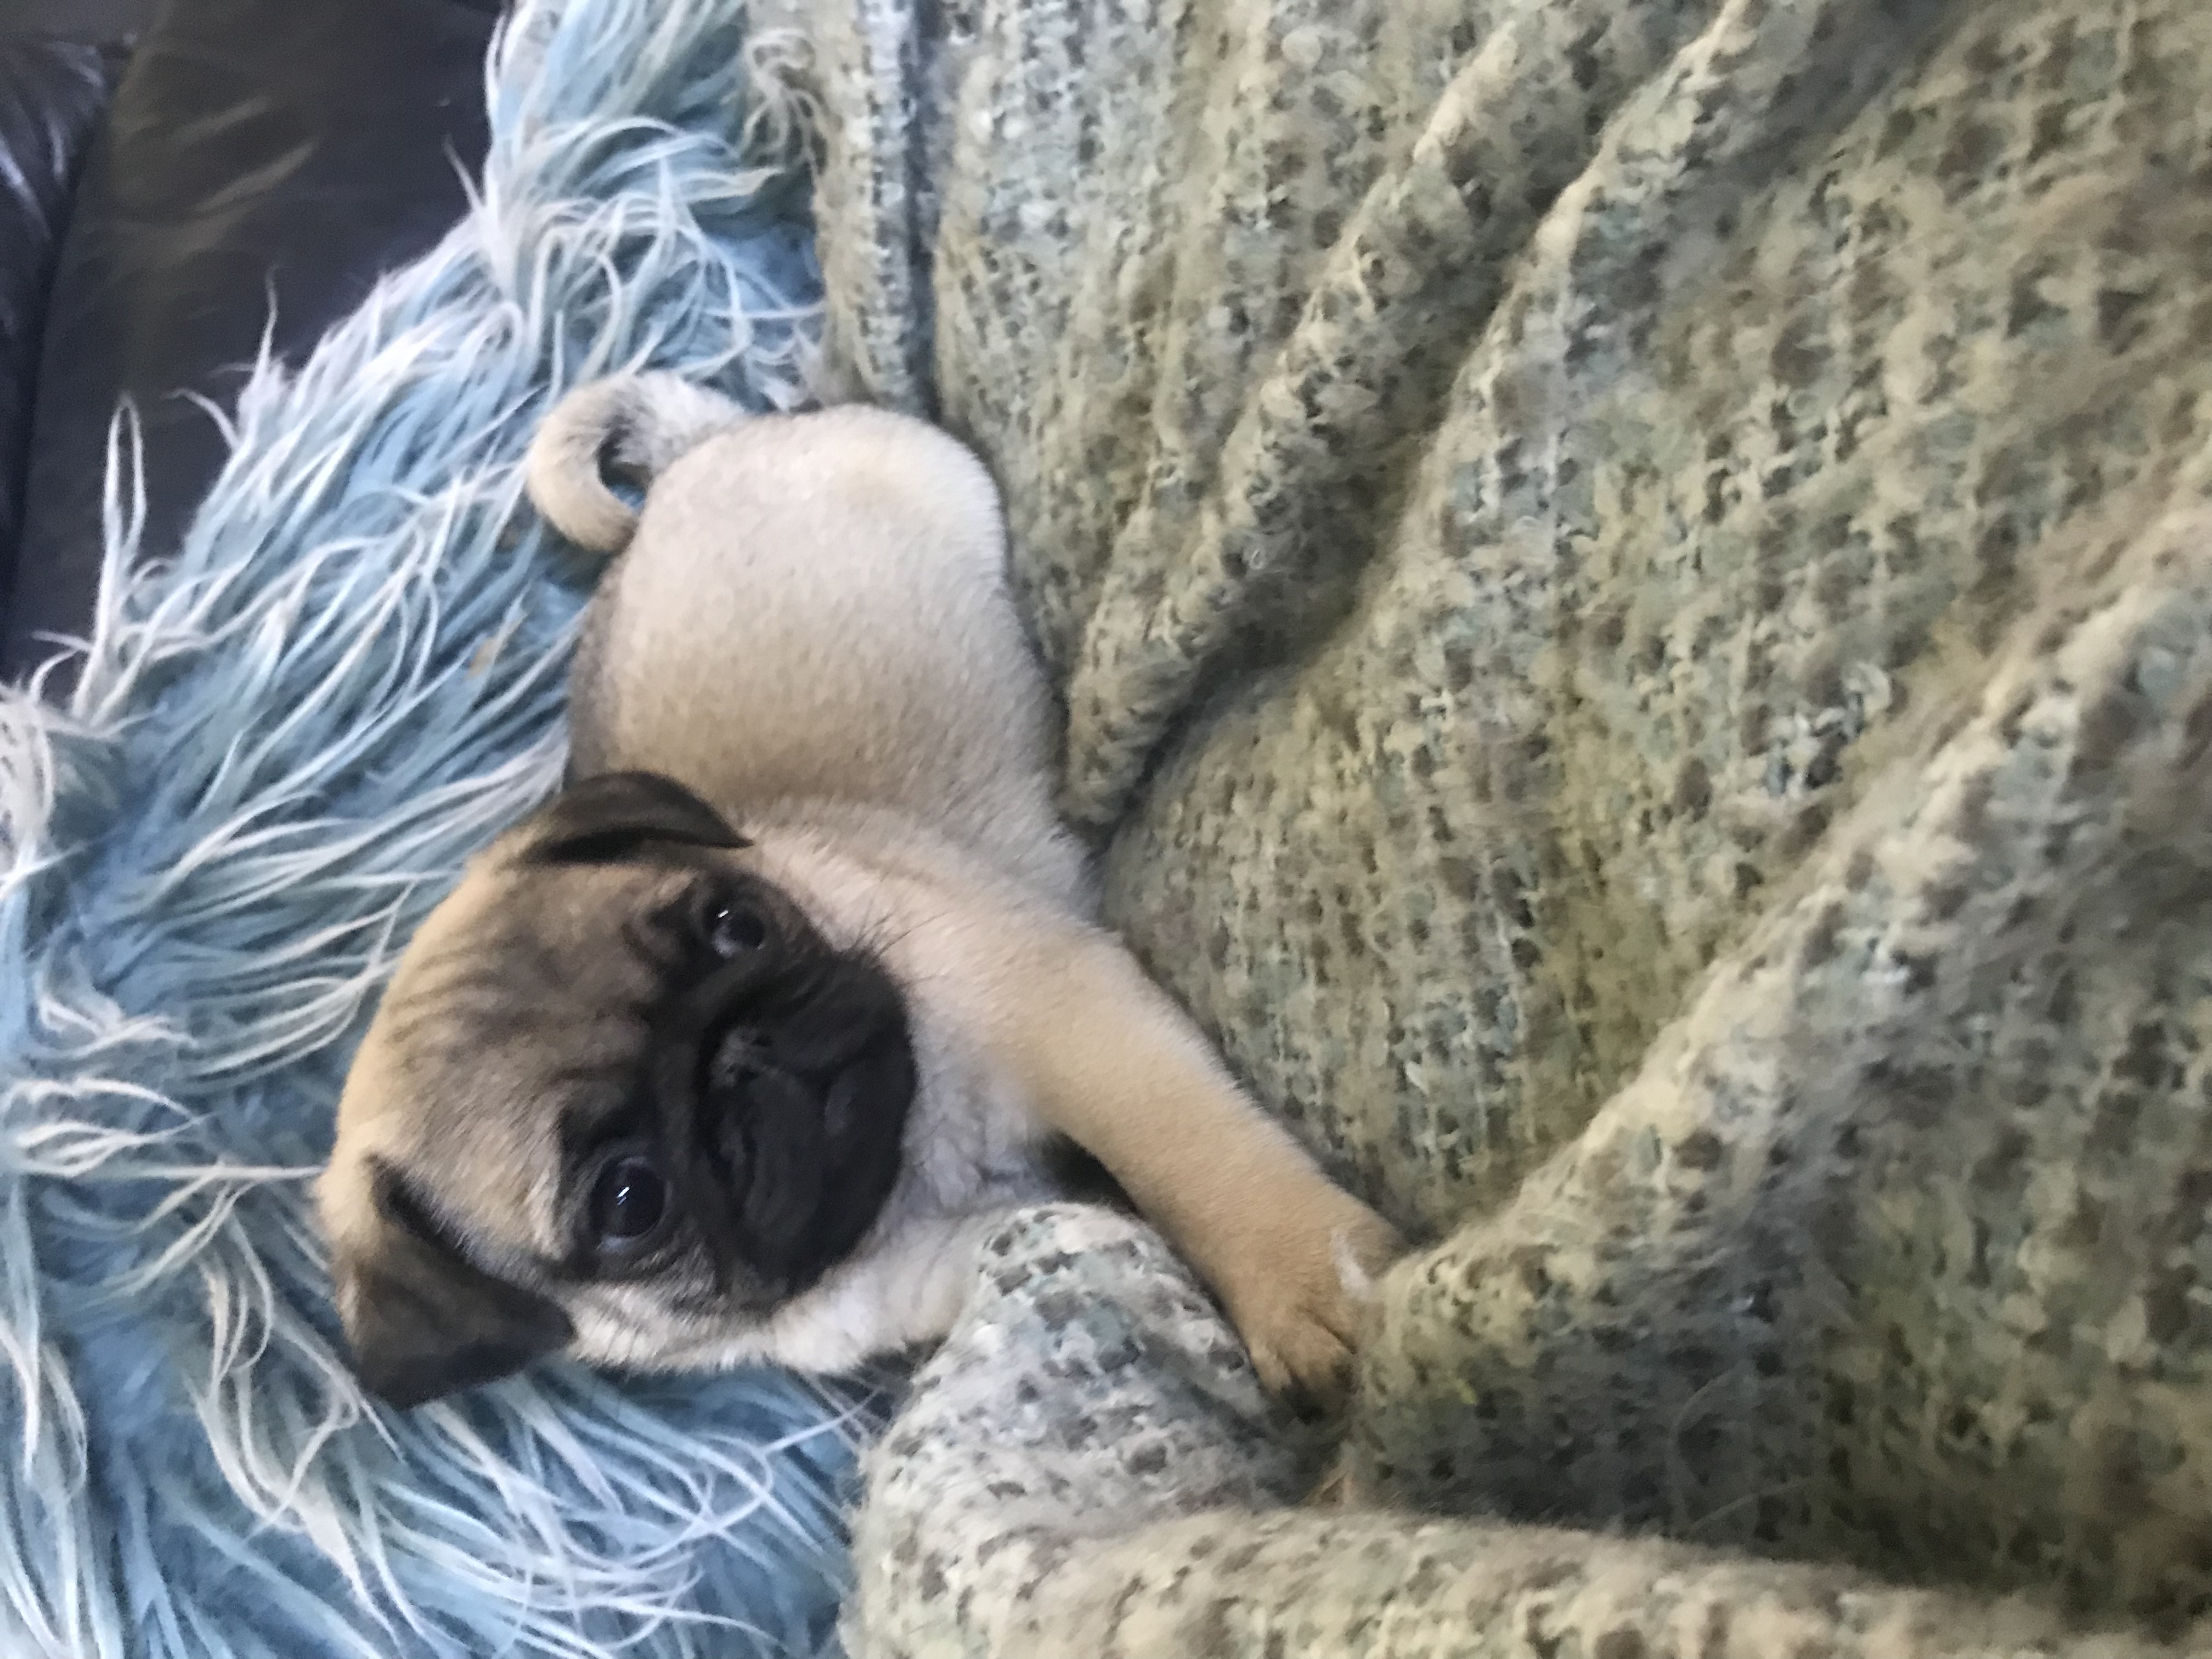 Purebred Fawn boy pug - Snub Nosed K9's - Dogs for Sale NZ & AUS